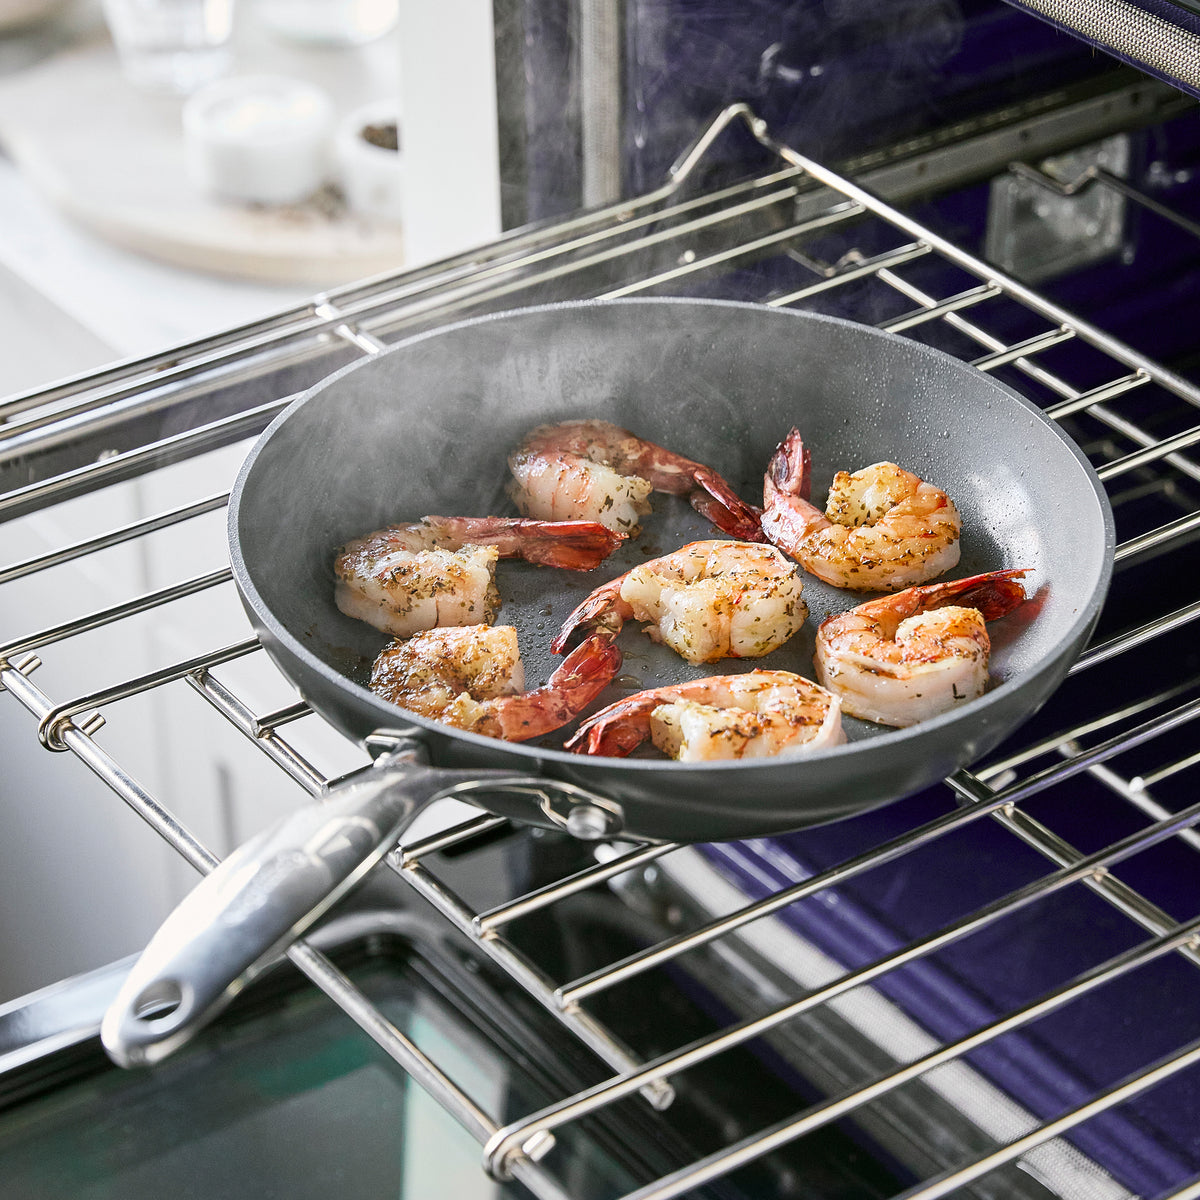 Buy PRO S+ Commercial Nonstick Fry & Grill Pans